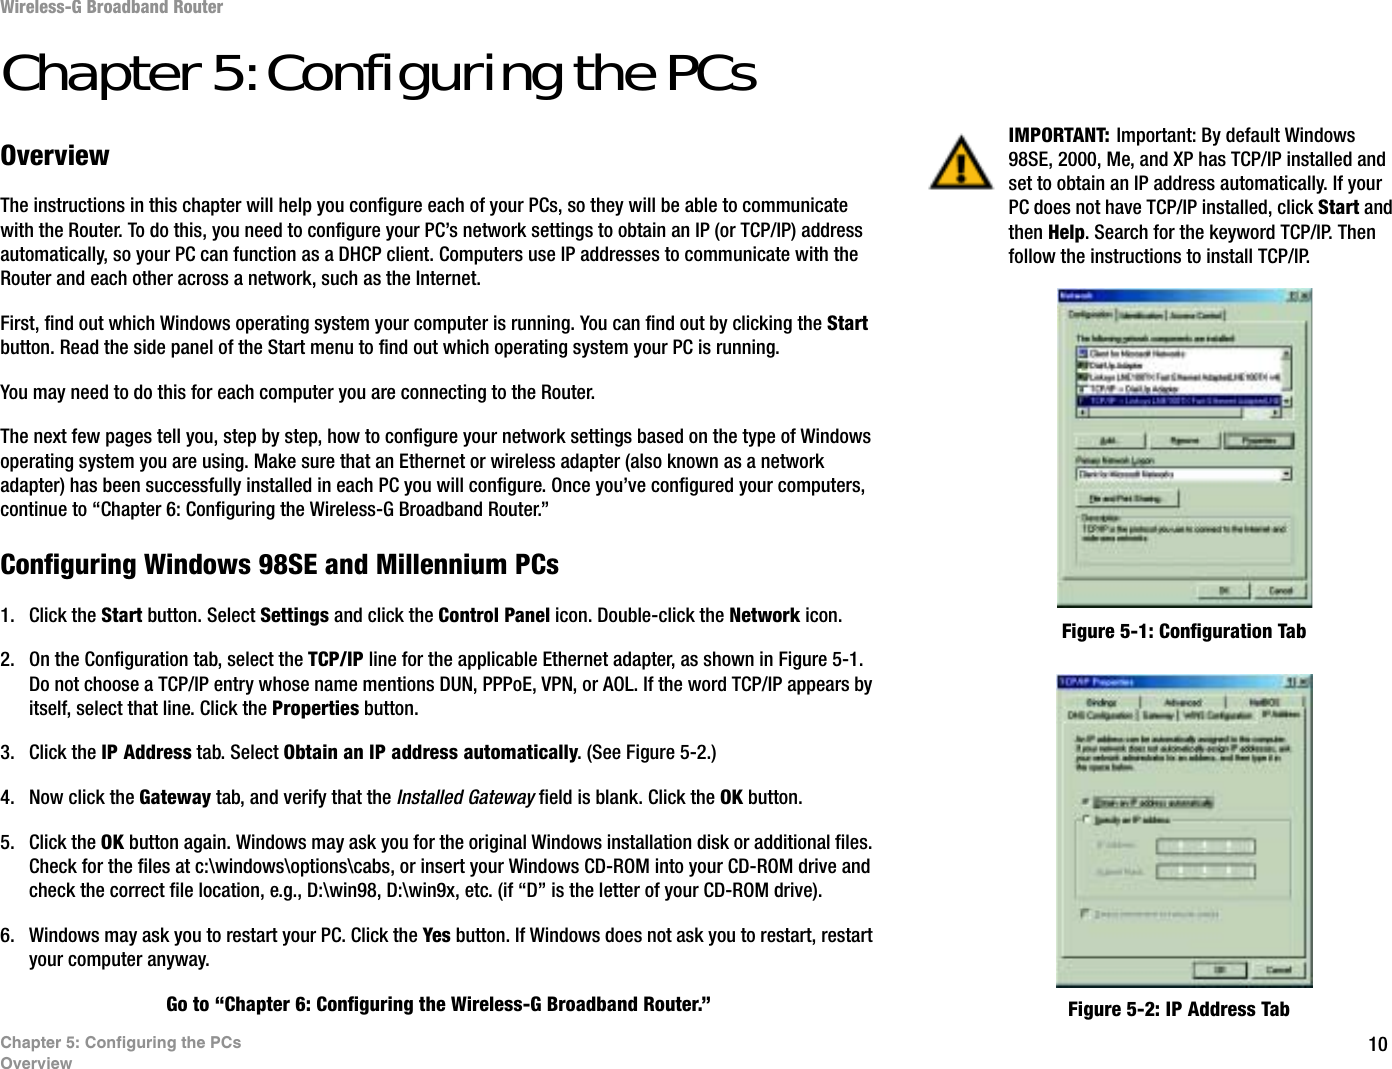 10Chapter 5: Configuring the PCsOverviewWireless-G Broadband RouterChapter 5: Configuring the PCsOverviewThe instructions in this chapter will help you configure each of your PCs, so they will be able to communicate with the Router. To do this, you need to configure your PC’s network settings to obtain an IP (or TCP/IP) address automatically, so your PC can function as a DHCP client. Computers use IP addresses to communicate with the Router and each other across a network, such as the Internet.First, find out which Windows operating system your computer is running. You can find out by clicking the Start button. Read the side panel of the Start menu to find out which operating system your PC is running.You may need to do this for each computer you are connecting to the Router.The next few pages tell you, step by step, how to configure your network settings based on the type of Windows operating system you are using. Make sure that an Ethernet or wireless adapter (also known as a network adapter) has been successfully installed in each PC you will configure. Once you’ve configured your computers, continue to “Chapter 6: Configuring the Wireless-G Broadband Router.”Configuring Windows 98SE and Millennium PCs1. Click the Start button. Select Settings and click the Control Panel icon. Double-click the Network icon.2. On the Configuration tab, select the TCP/IP line for the applicable Ethernet adapter, as shown in Figure 5-1. Do not choose a TCP/IP entry whose name mentions DUN, PPPoE, VPN, or AOL. If the word TCP/IP appears by itself, select that line. Click the Properties button.3. Click the IP Address tab. Select Obtain an IP address automatically. (See Figure 5-2.)4. Now click the Gateway tab, and verify that the Installed Gateway field is blank. Click the OK button.5. Click the OK button again. Windows may ask you for the original Windows installation disk or additional files. Check for the files at c:\windows\options\cabs, or insert your Windows CD-ROM into your CD-ROM drive and check the correct file location, e.g., D:\win98, D:\win9x, etc. (if “D” is the letter of your CD-ROM drive).6. Windows may ask you to restart your PC. Click the Yes button. If Windows does not ask you to restart, restart your computer anyway.Go to “Chapter 6: Configuring the Wireless-G Broadband Router.”IMPORTANT: Important: By default Windows 98SE, 2000, Me, and XP has TCP/IP installed and set to obtain an IP address automatically. If your PC does not have TCP/IP installed, click Start and then Help. Search for the keyword TCP/IP. Then follow the instructions to install TCP/IP.Figure 5-1: Configuration TabFigure 5-2: IP Address Tab